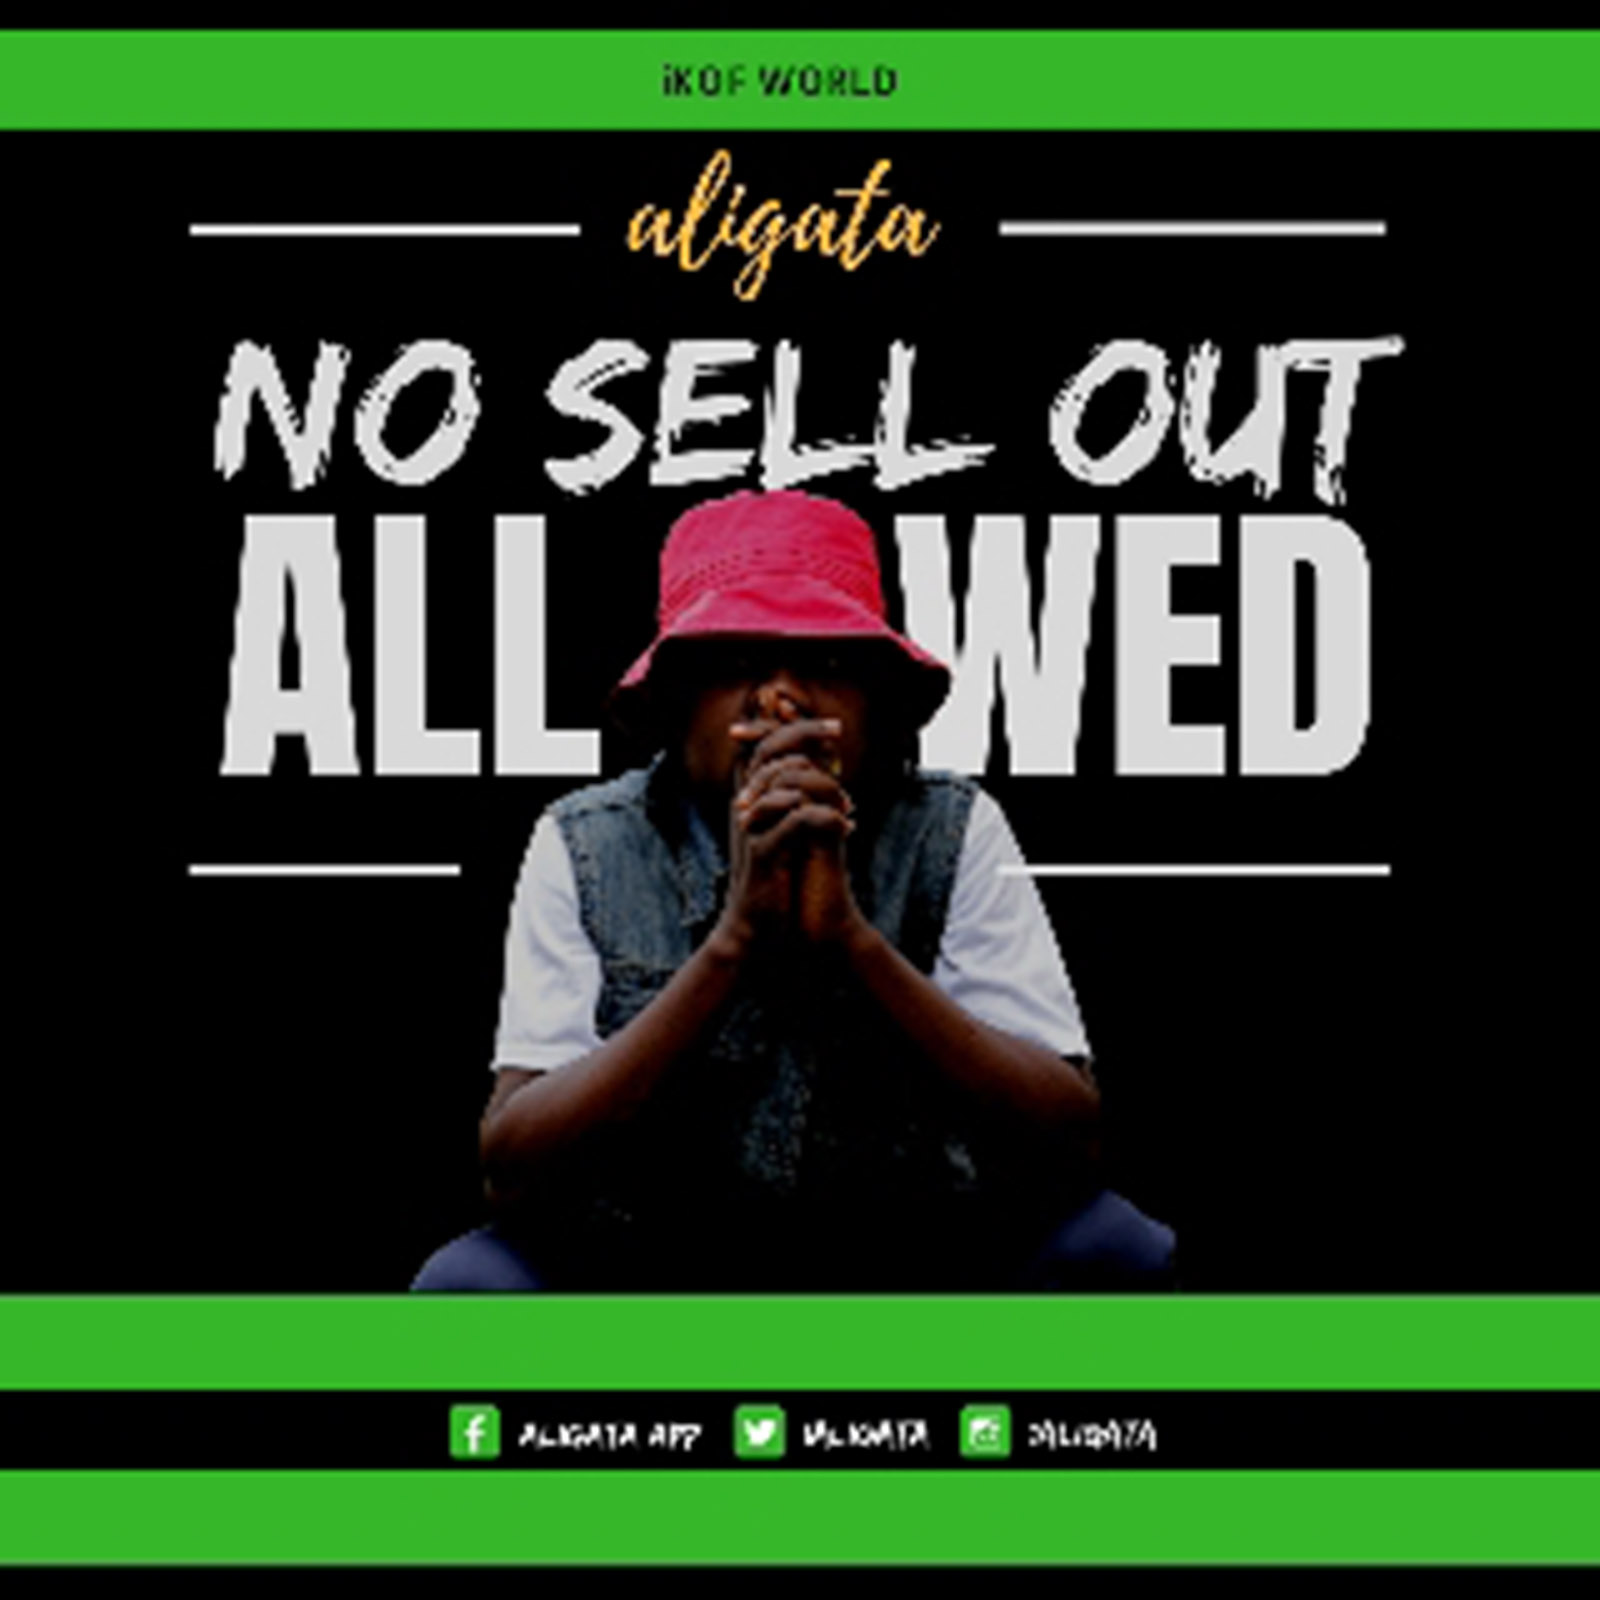 No Sell Out Allowed by Aligata